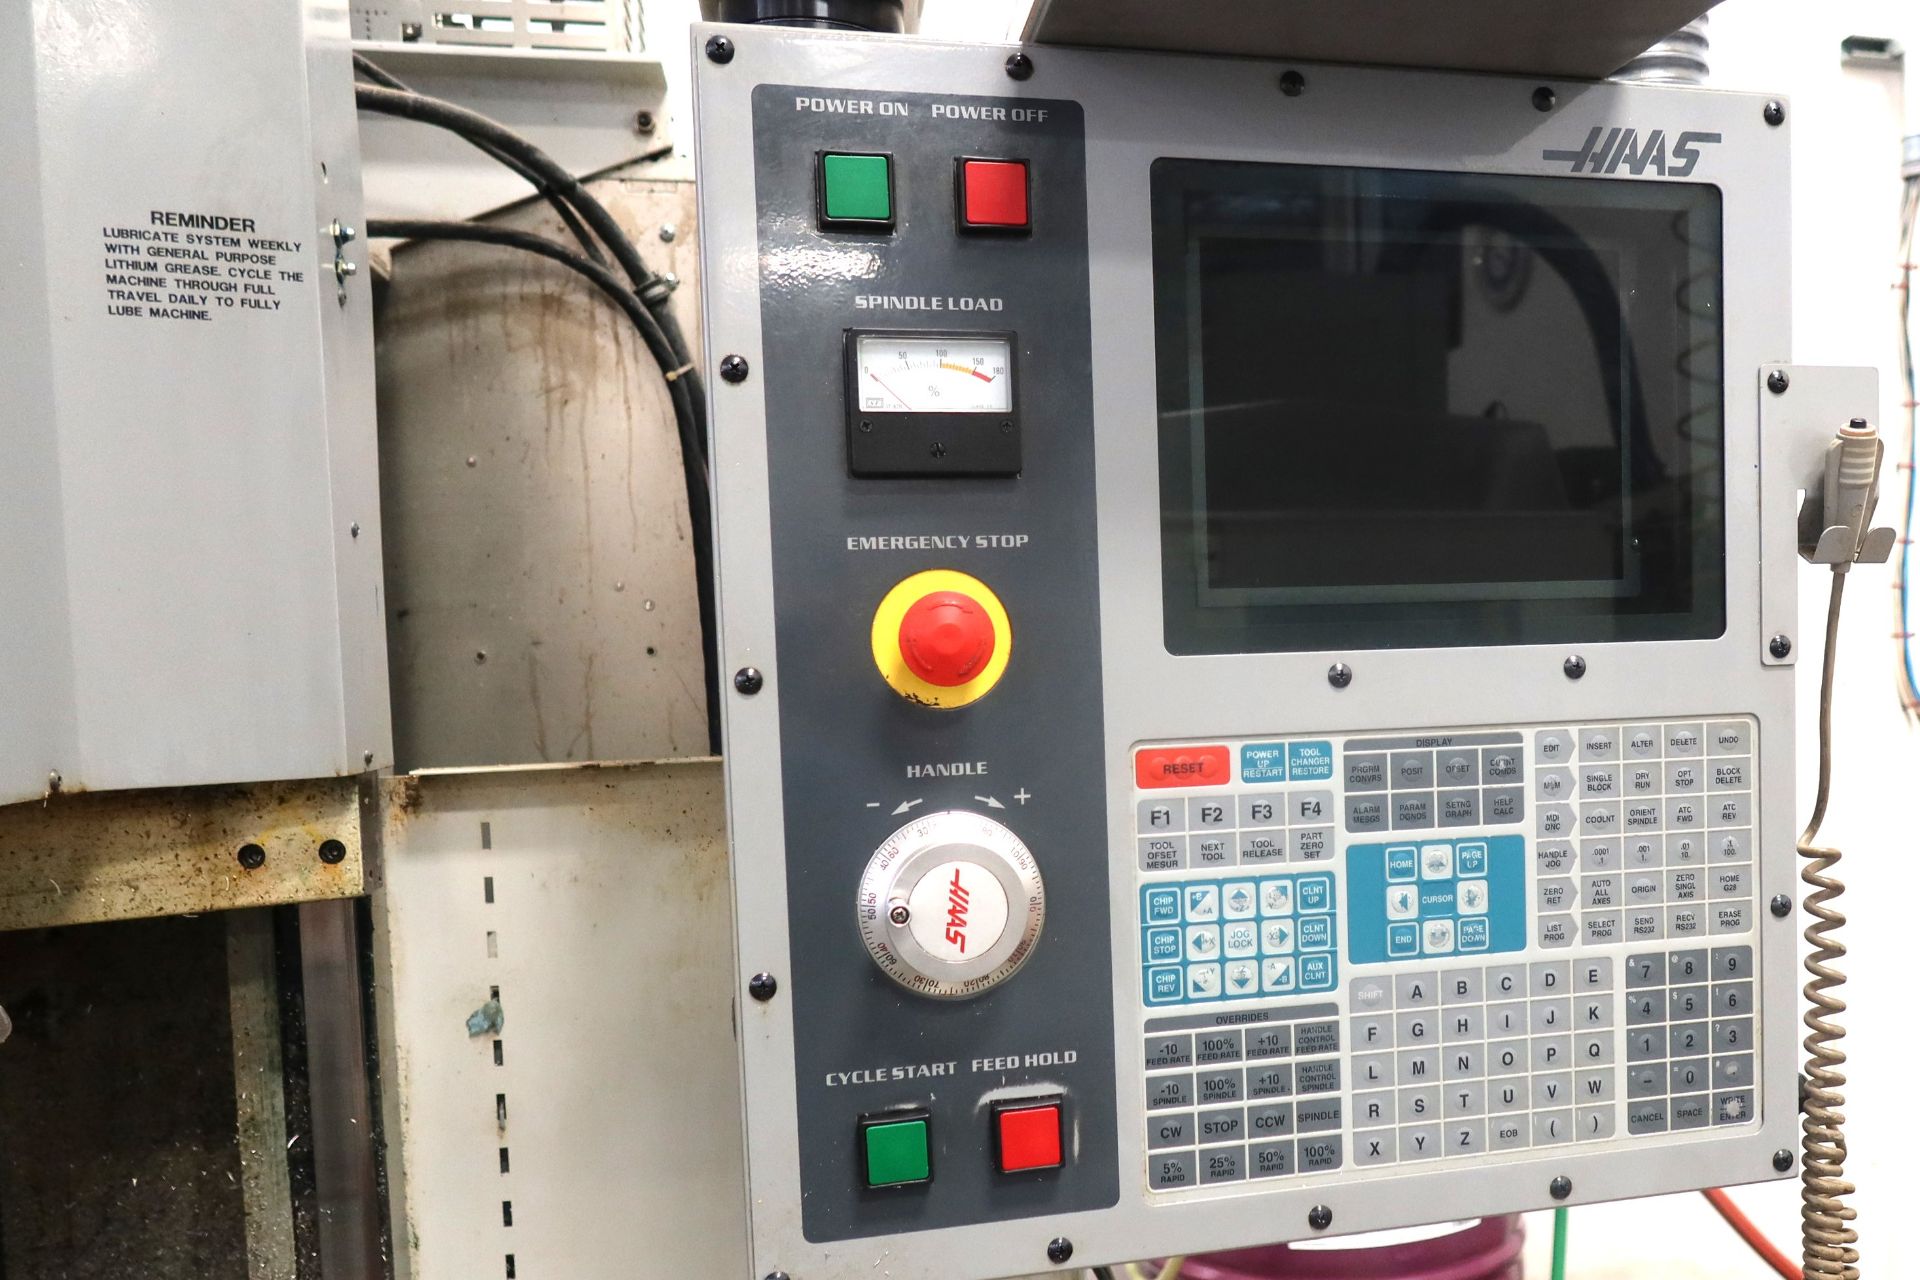 2001 Haas TM-1 CNC 4-axis Bed Type Vertical Milling Machine, SN 28257 - Image 2 of 7